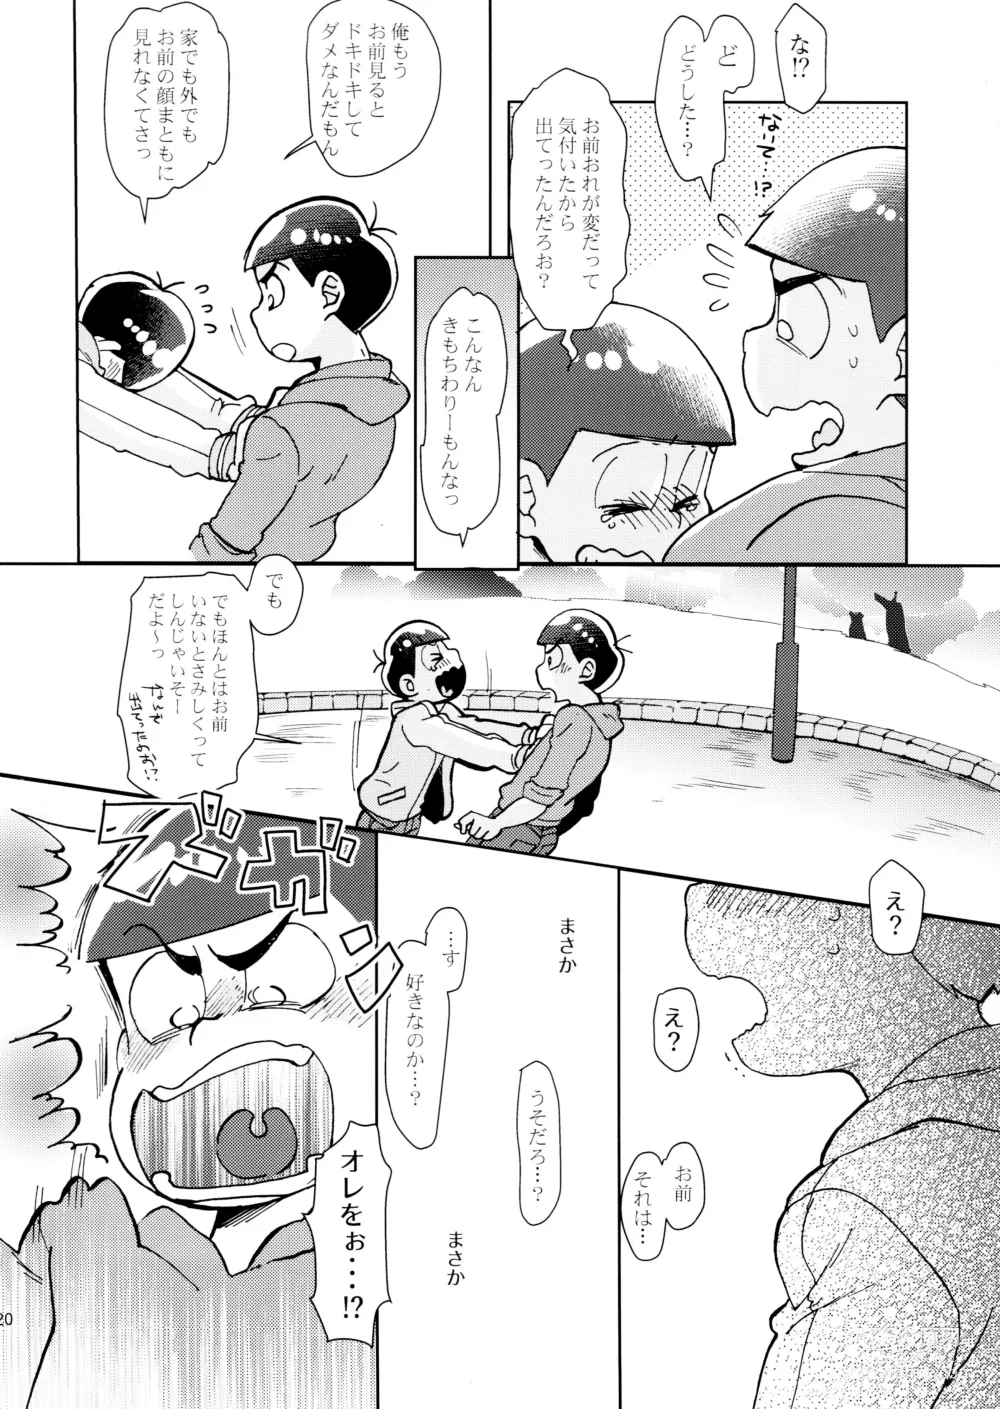 Page 20 of doujinshi Easy and Blue